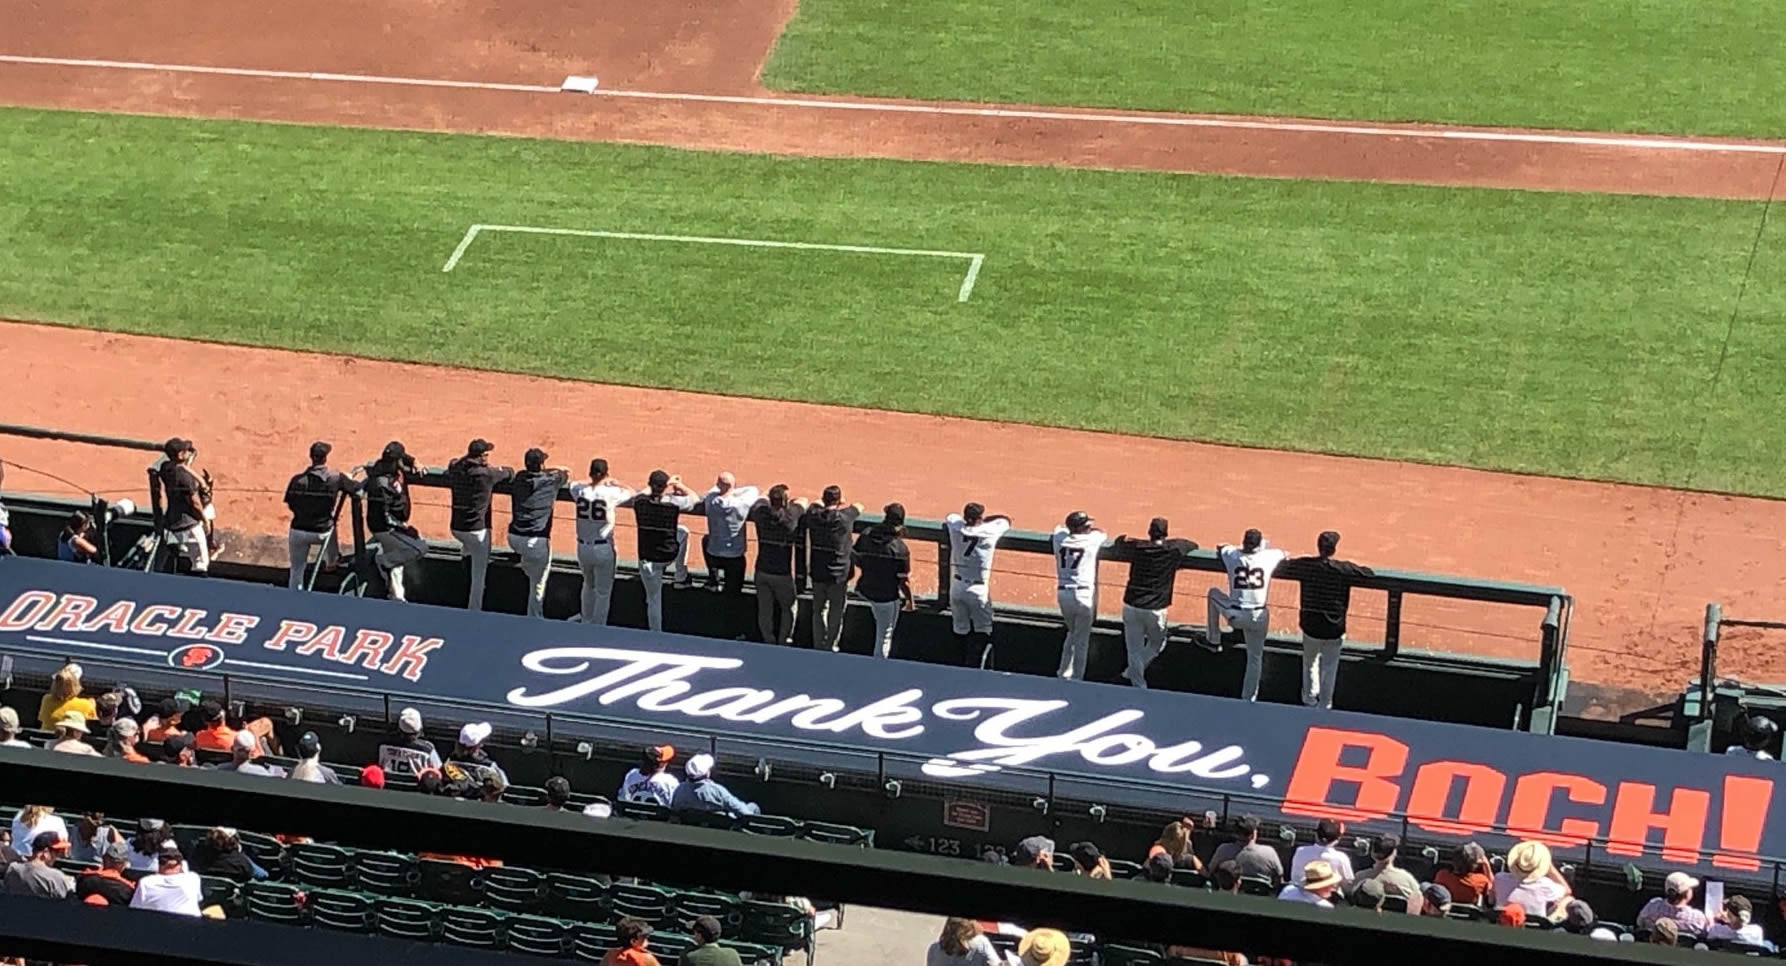 giants dugout at oracle